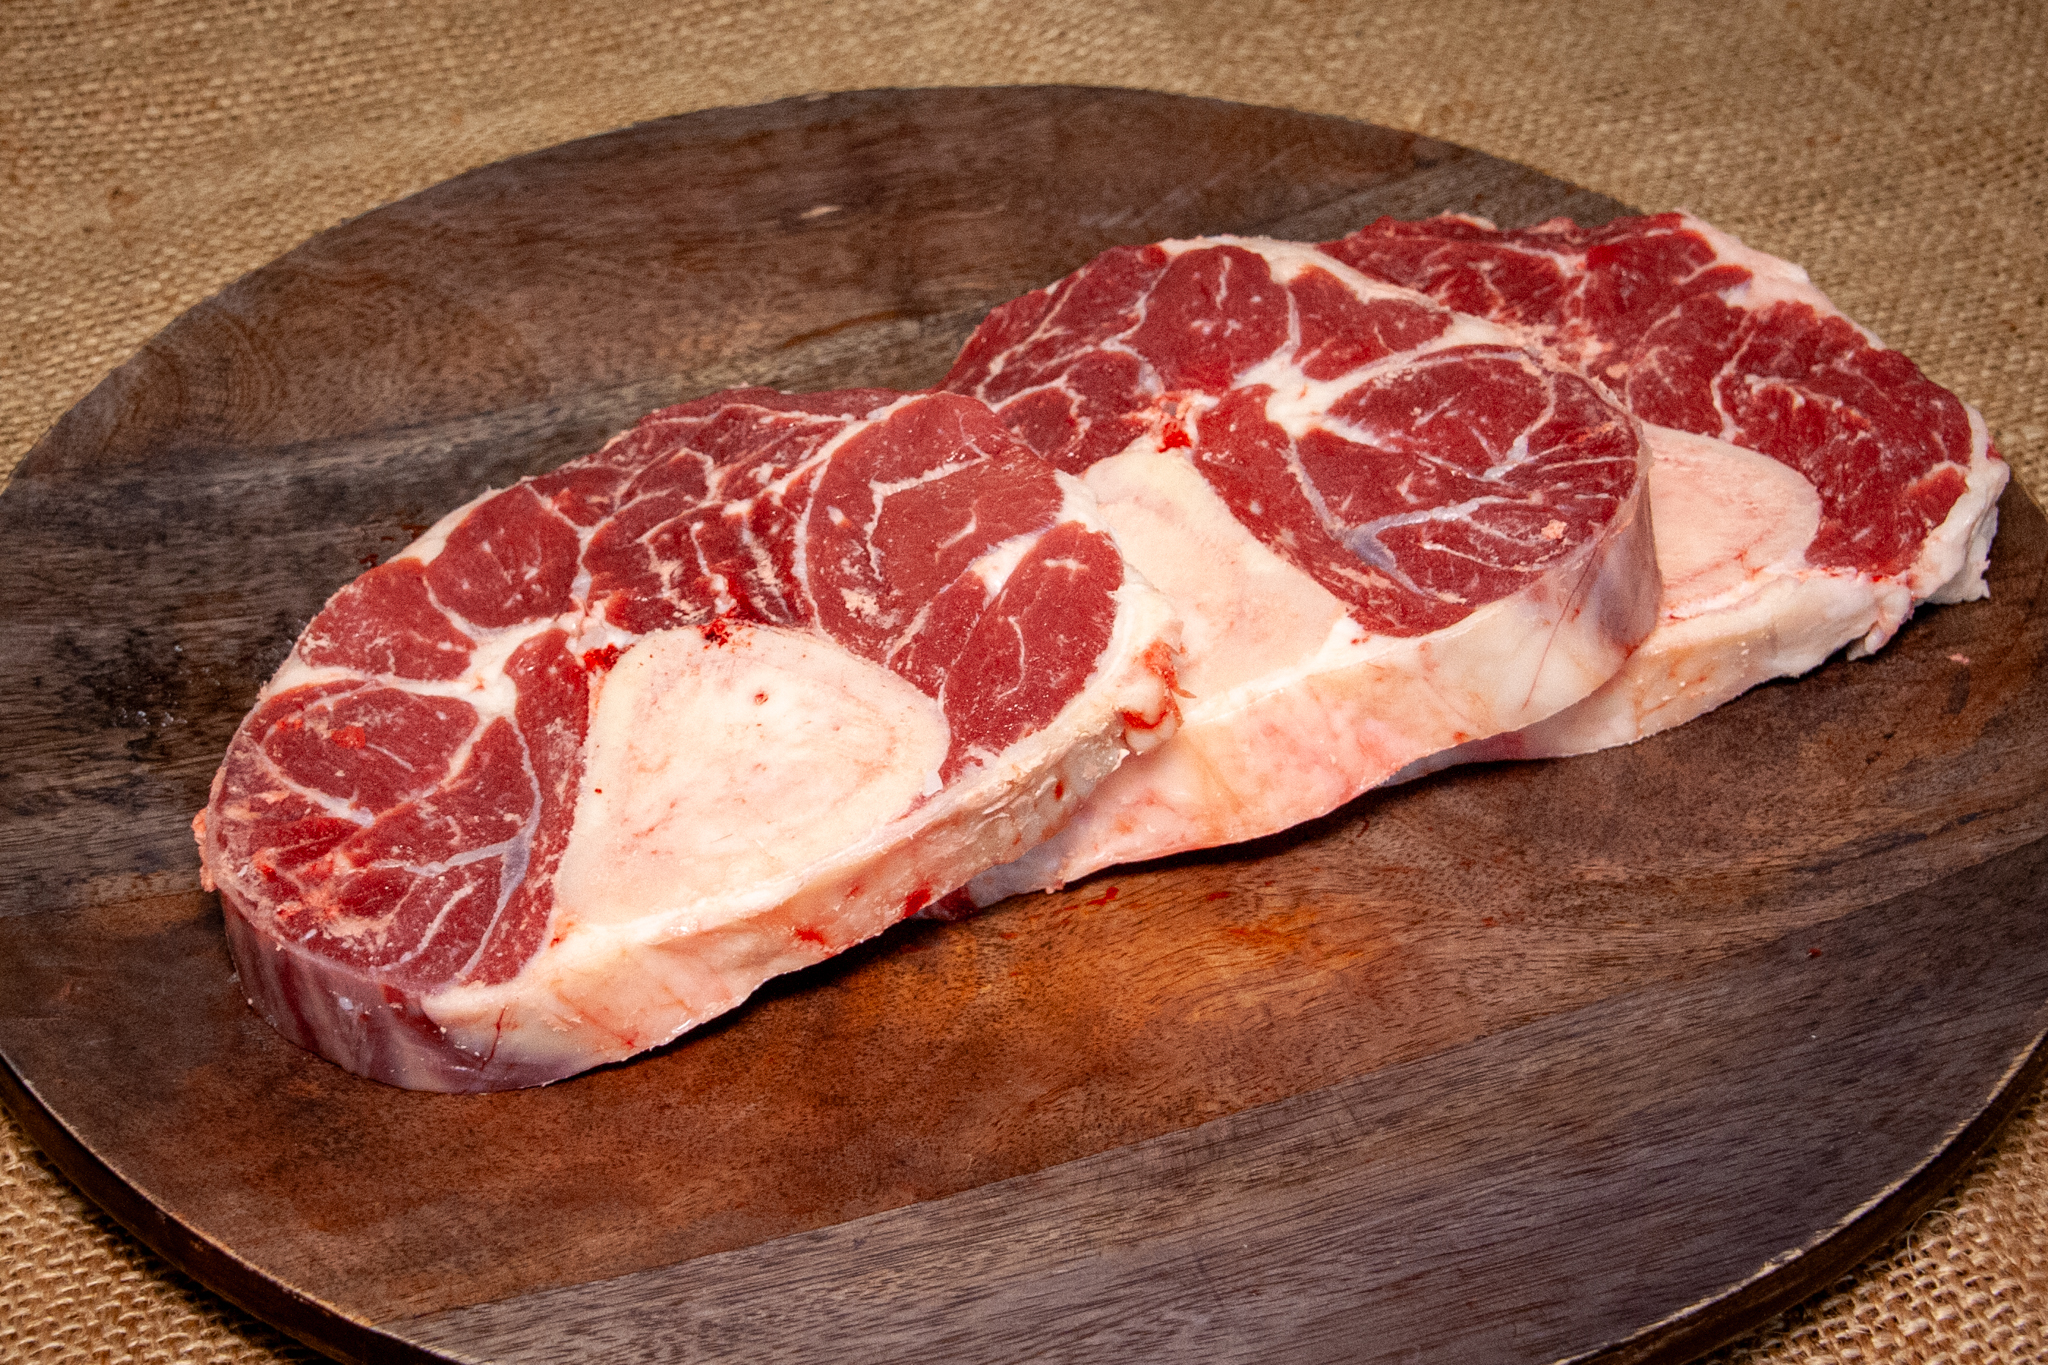 Ebert Grown Beef Shank available at Salmon's Meat Products and online for shipping